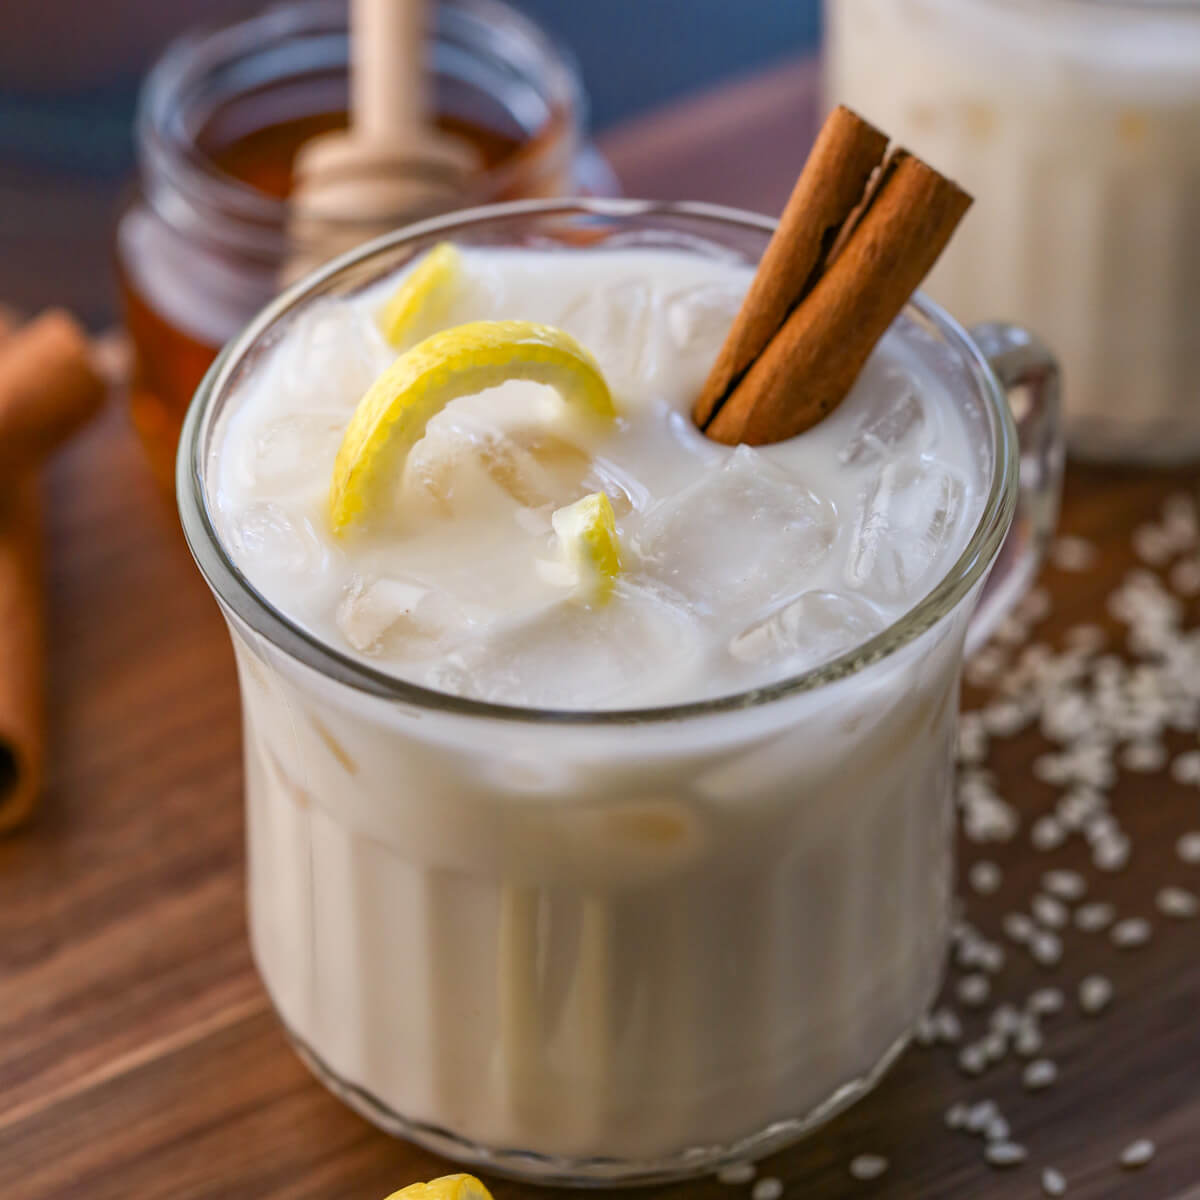 A cup of Puerto Rican horchata is in a glass cup with a cinnamon stick and a sliver of twirling lemon rind for garnish.